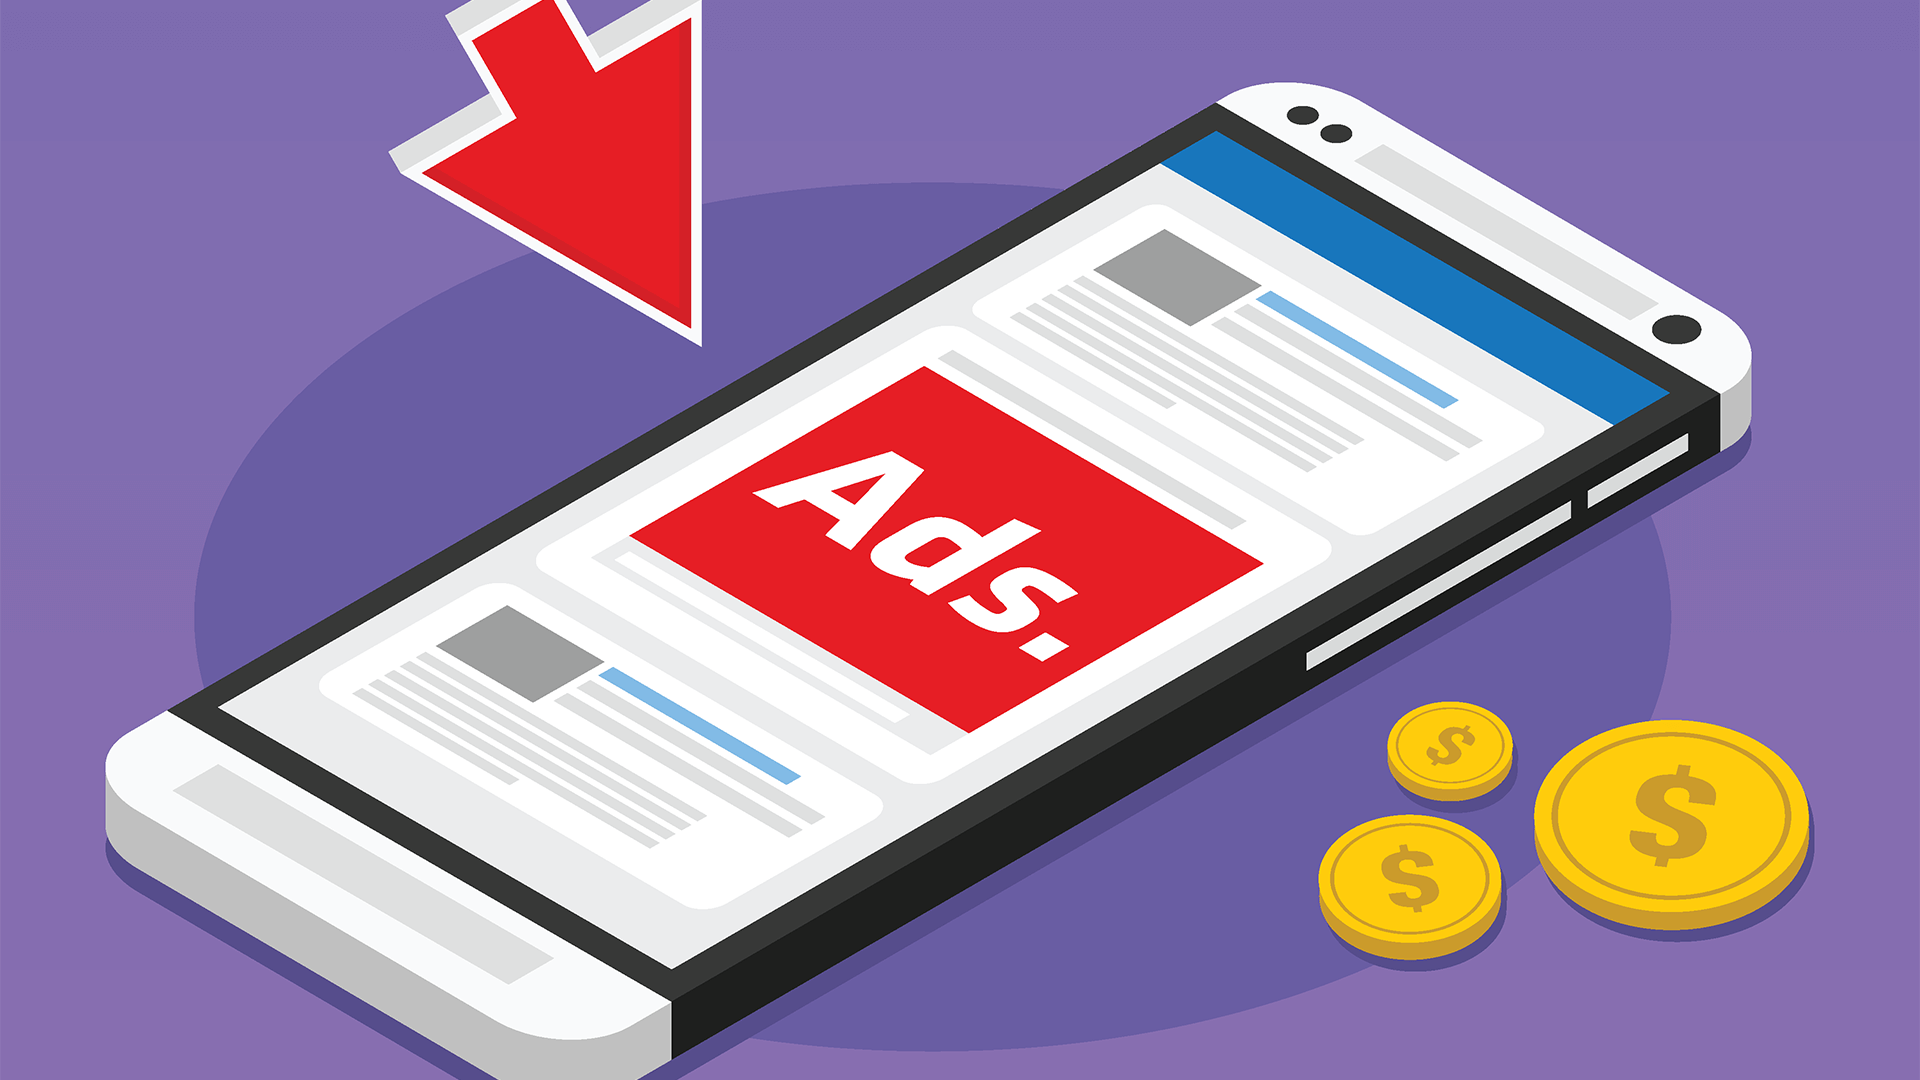 Google Ads Revenue and sales increase